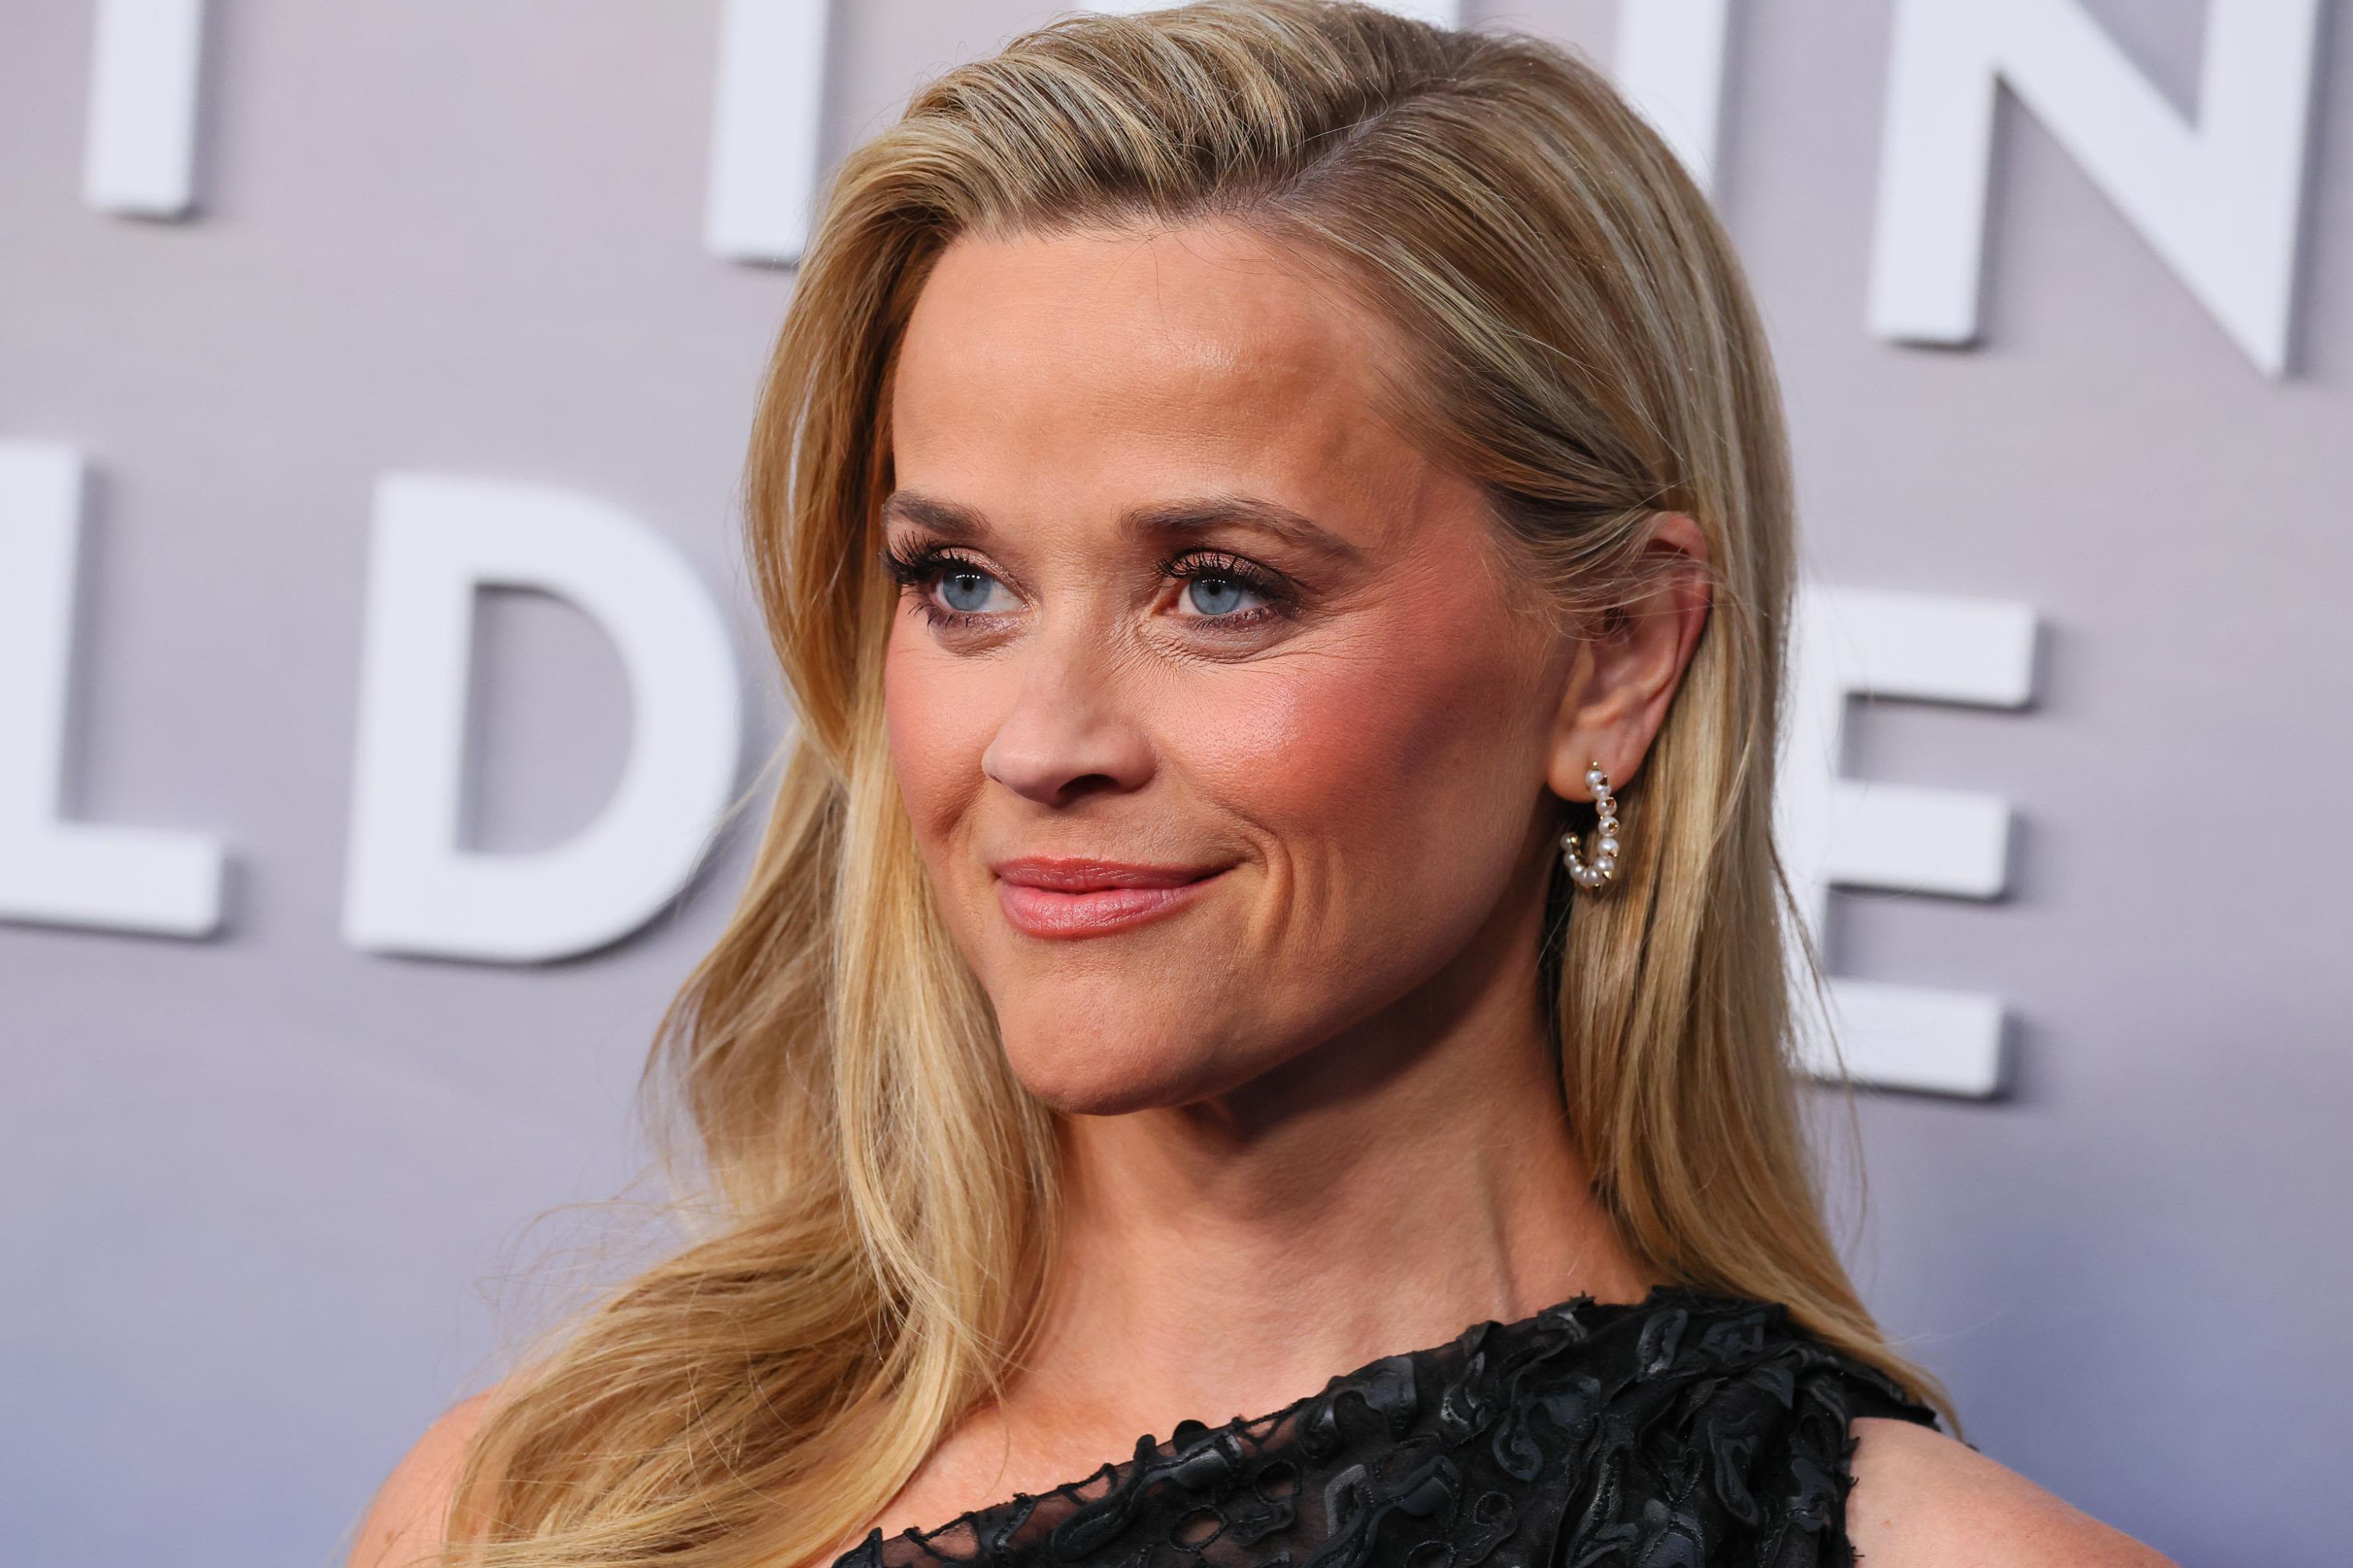 Kohl's adds Reese Witherspoon's clothing brand to its mix